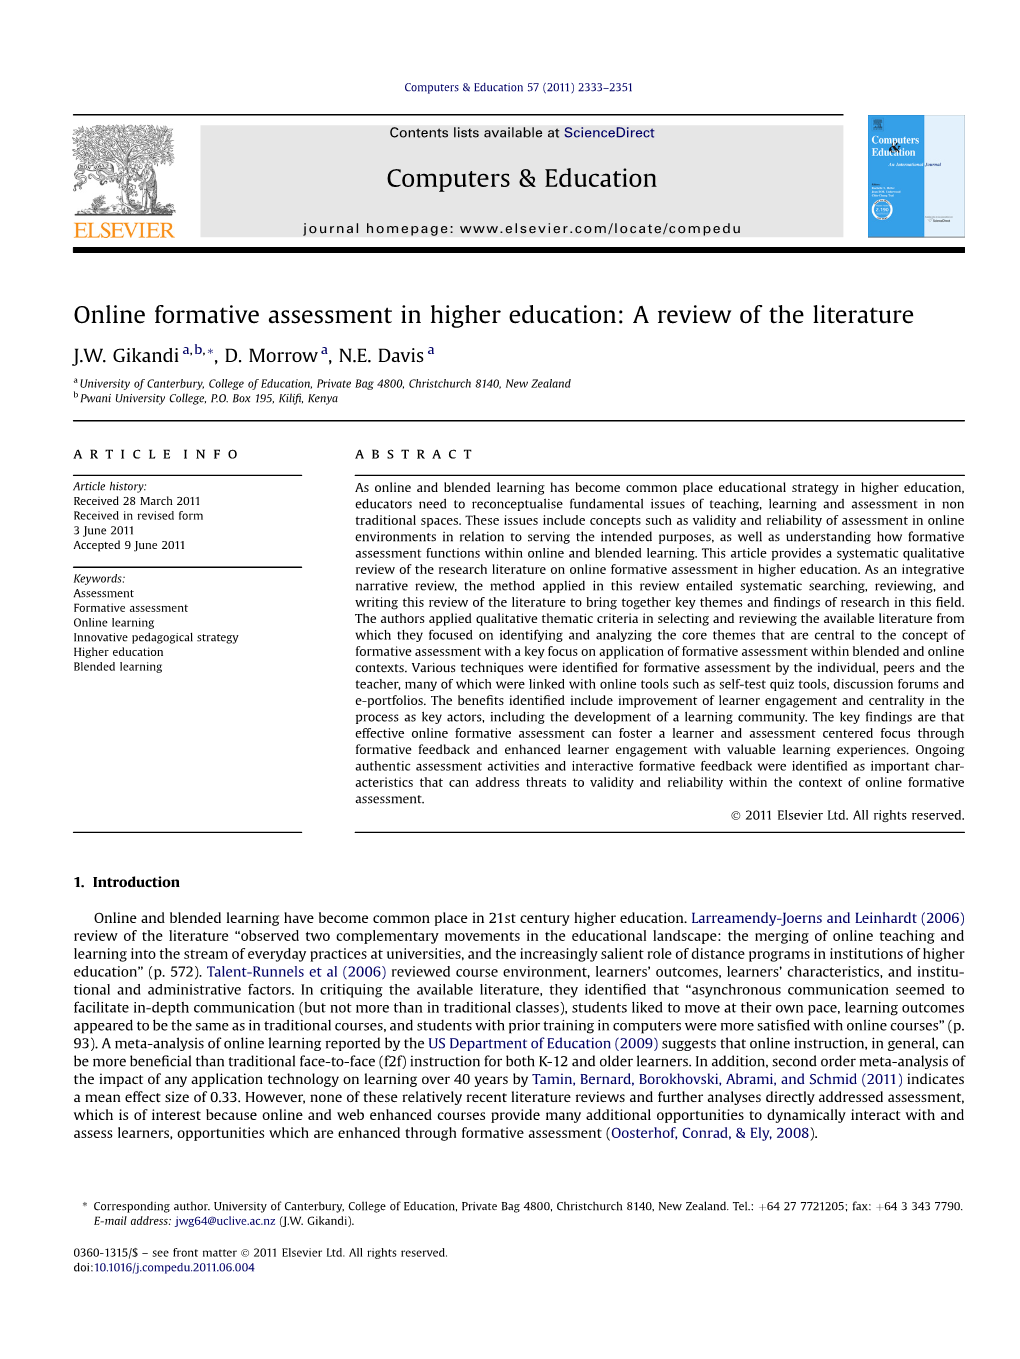 Online Formative Assessment in Higher Education: a Review of the Literature